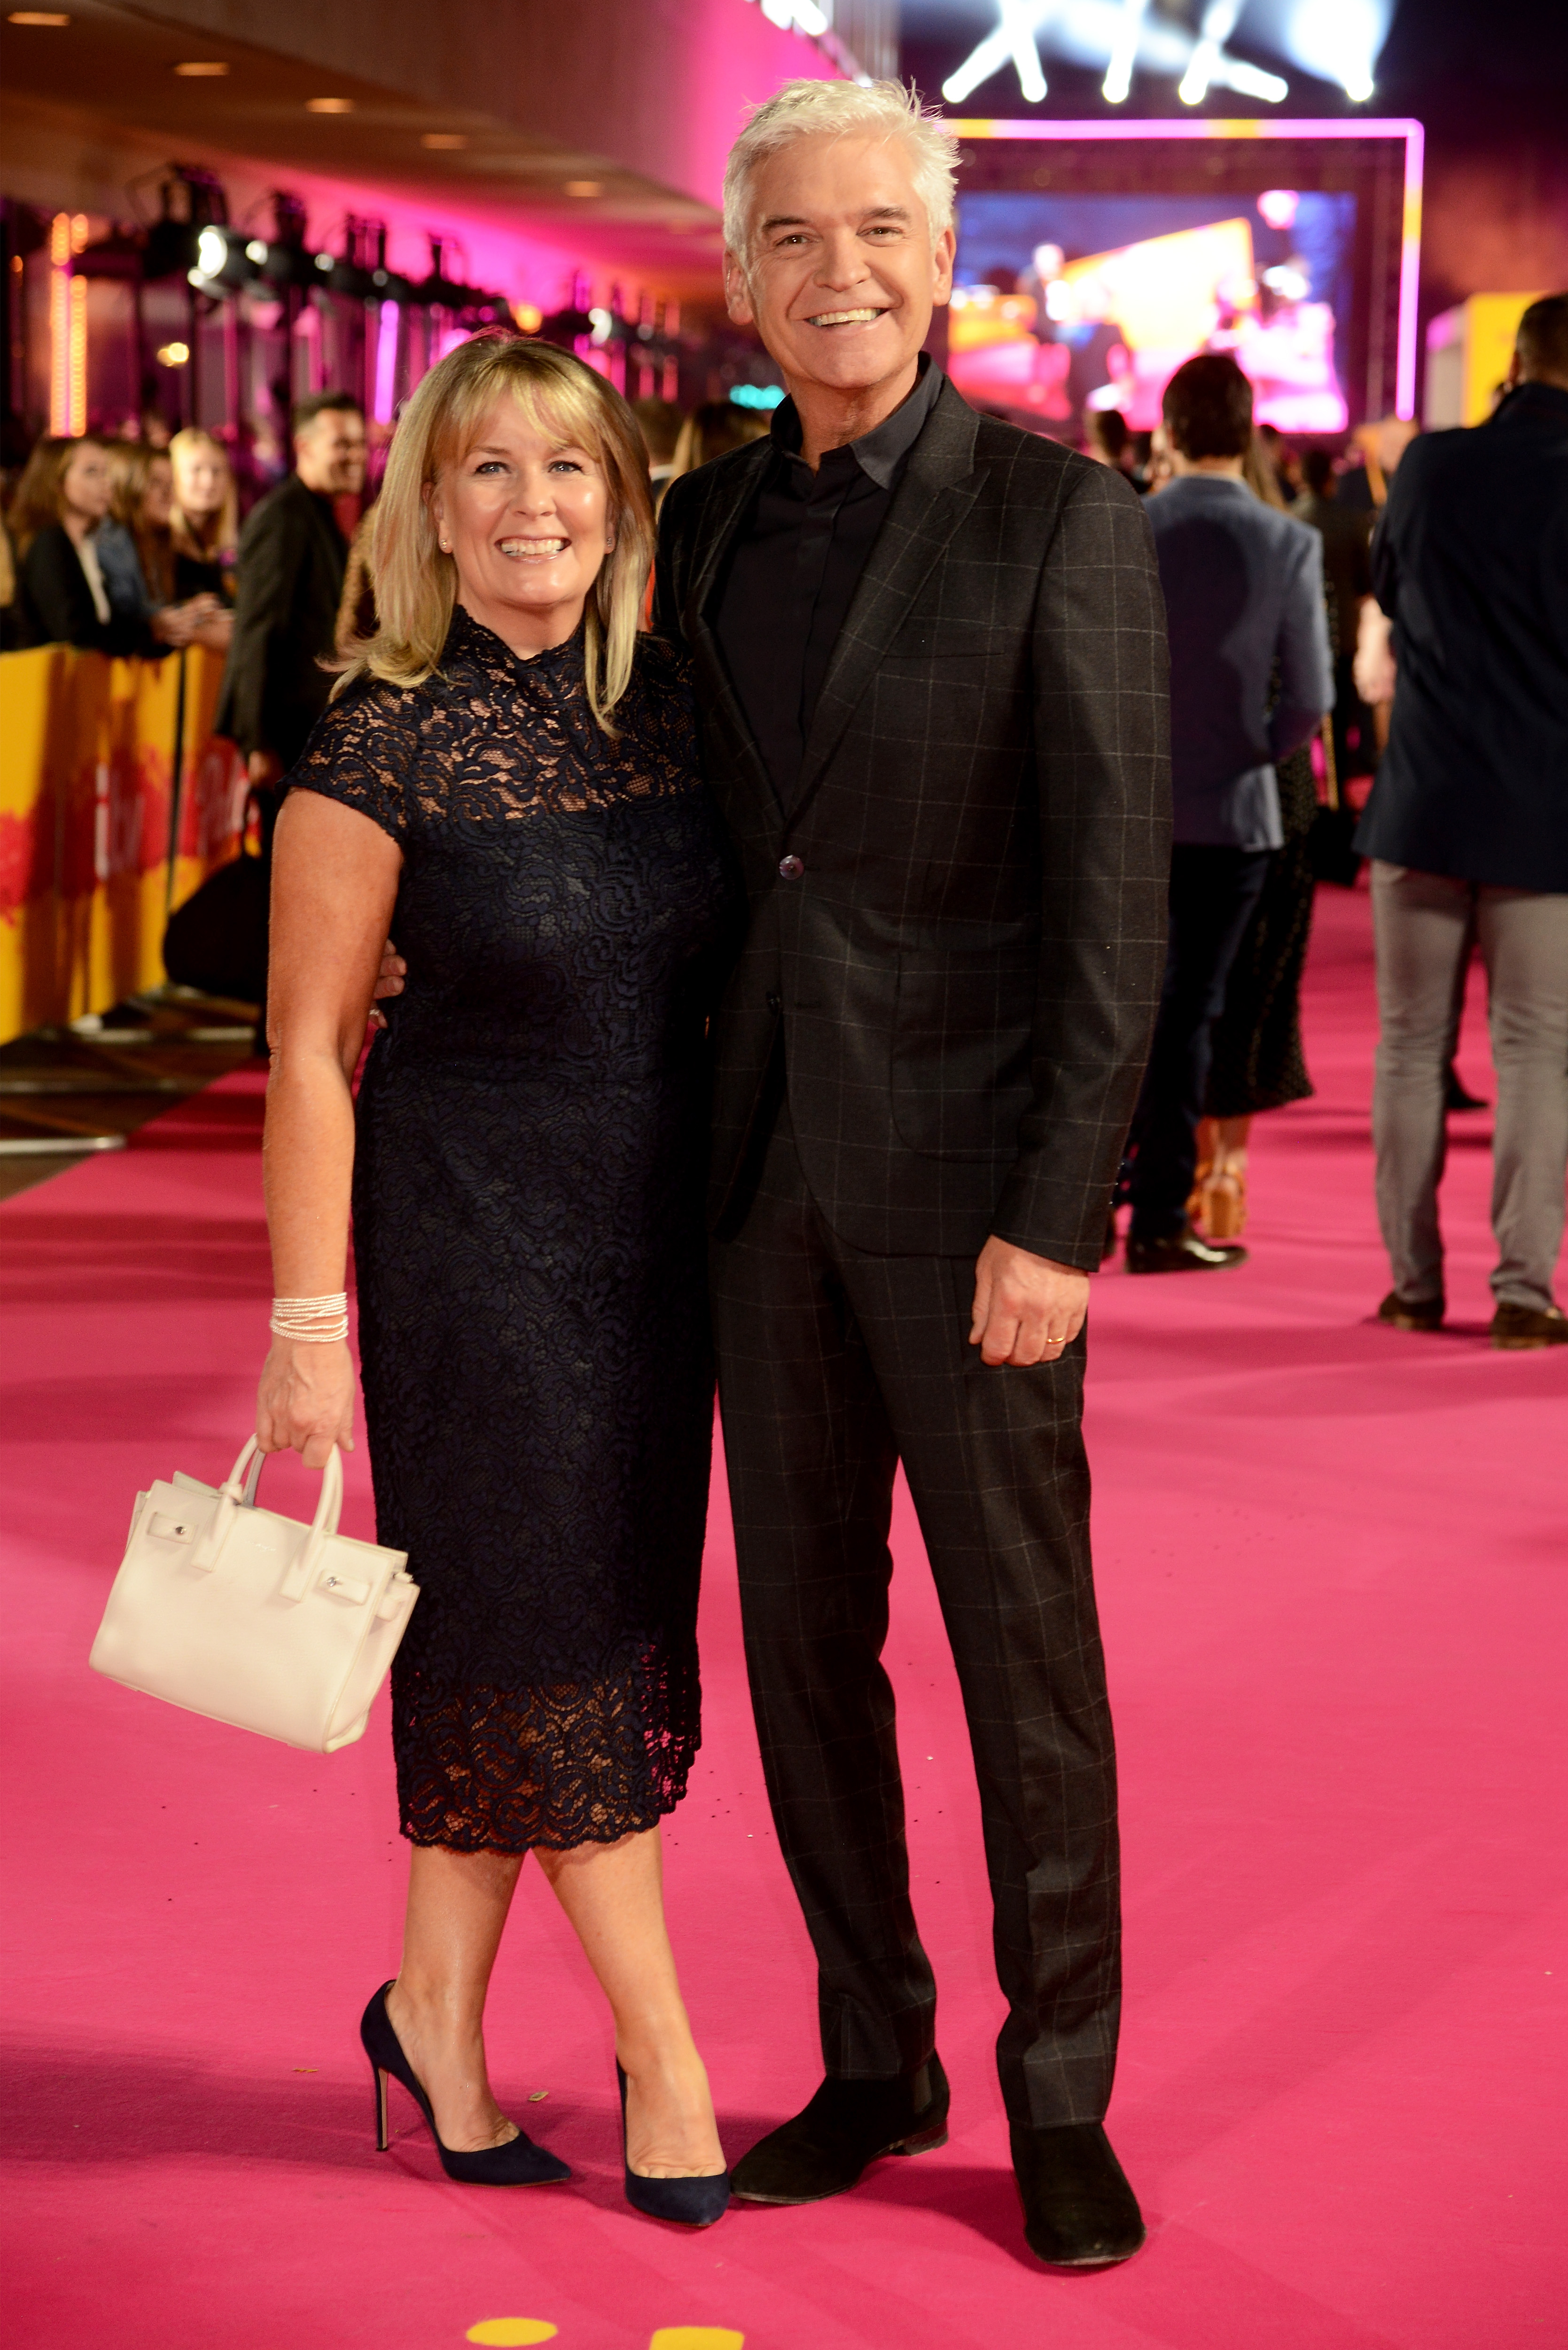 Stephanie Lowe and Phillip Schofield at the ITV Palooza! on October 16, 2018, in London, England. | Source: Getty Images